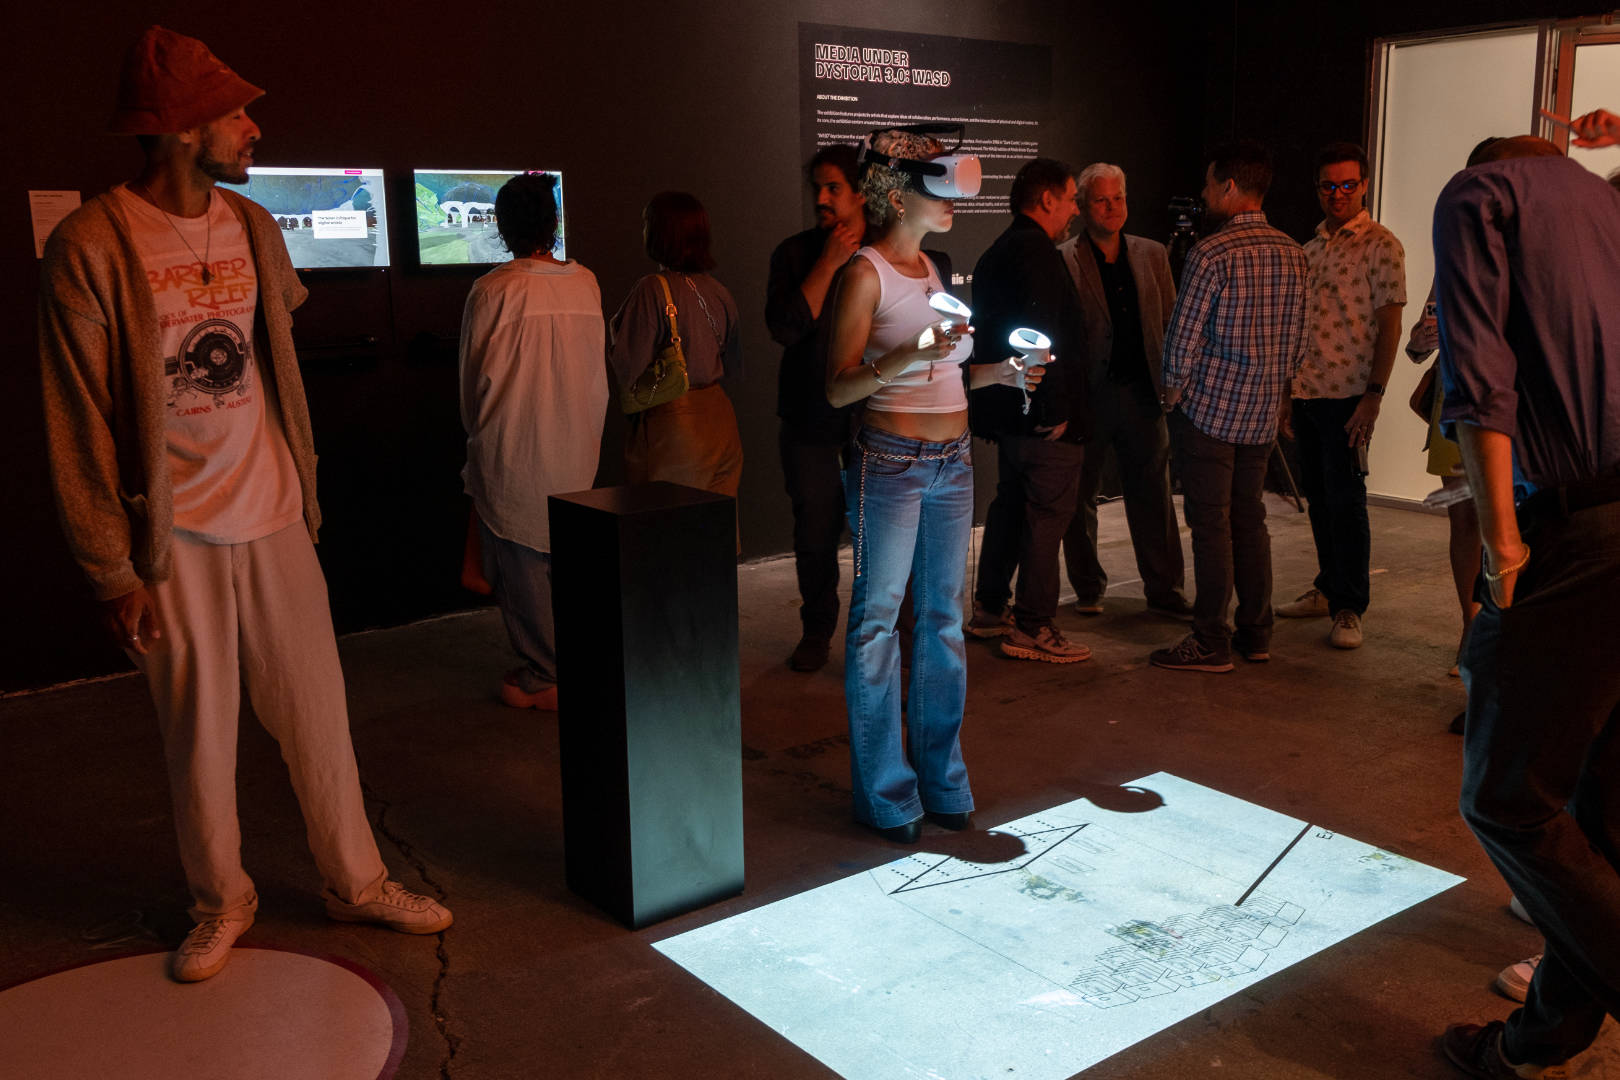 A woman using an Oculus standing over a projection of a metaverse scene, with people around at the MUD 3.0 exhibition